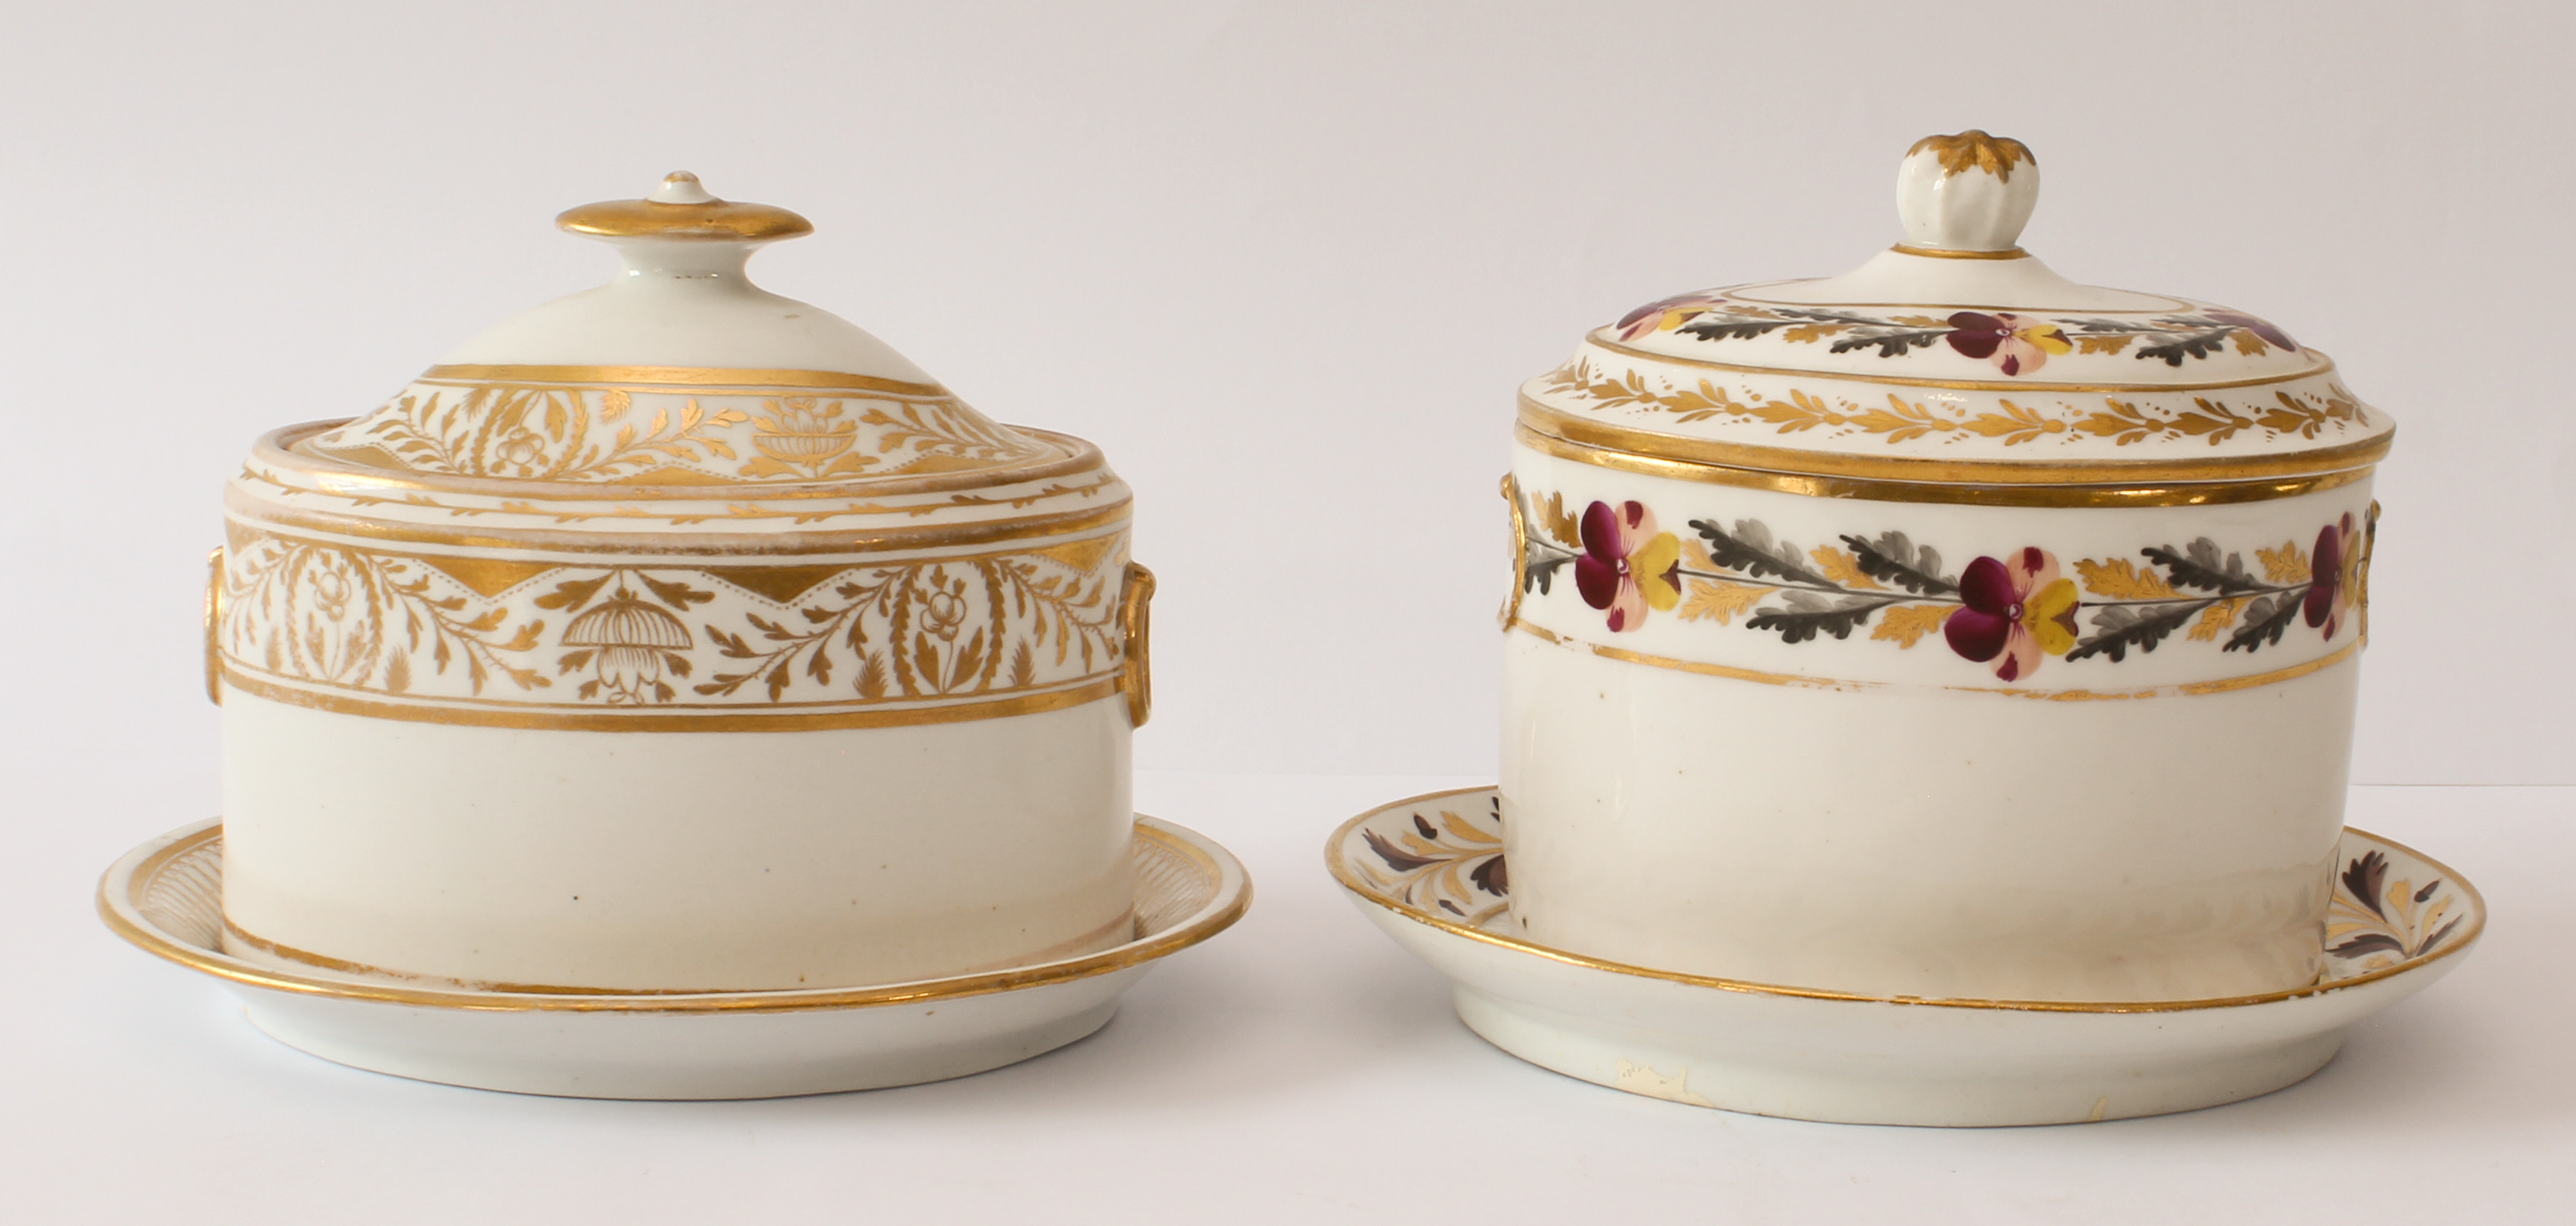 Two 19th century English porcelain oval sugar boxes and closely matched stands - one decorated